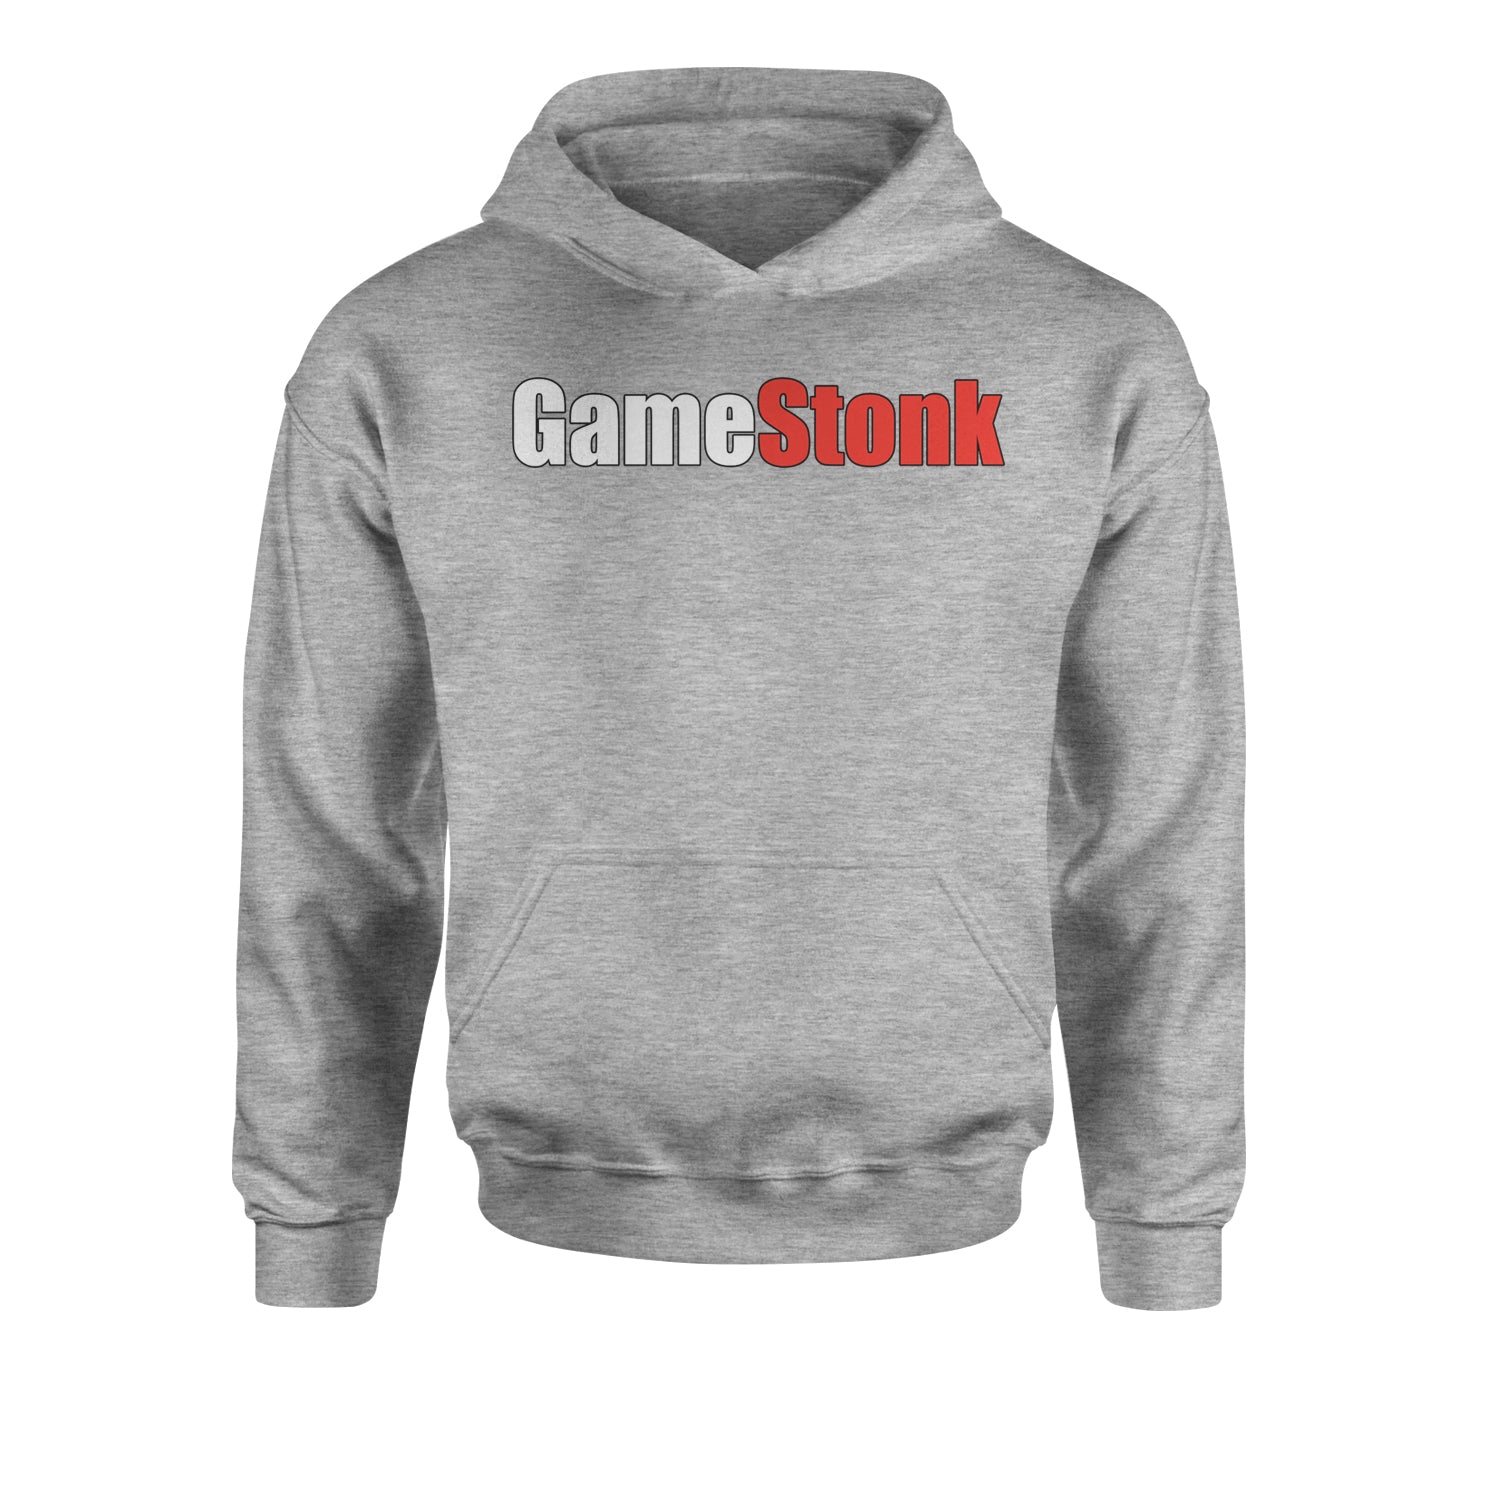 GameStonk - GME To The Moon Youth-Sized Hoodie elon, game, gamestop, GME, hood, investment, musk, robin, robinhood, stop by Expression Tees